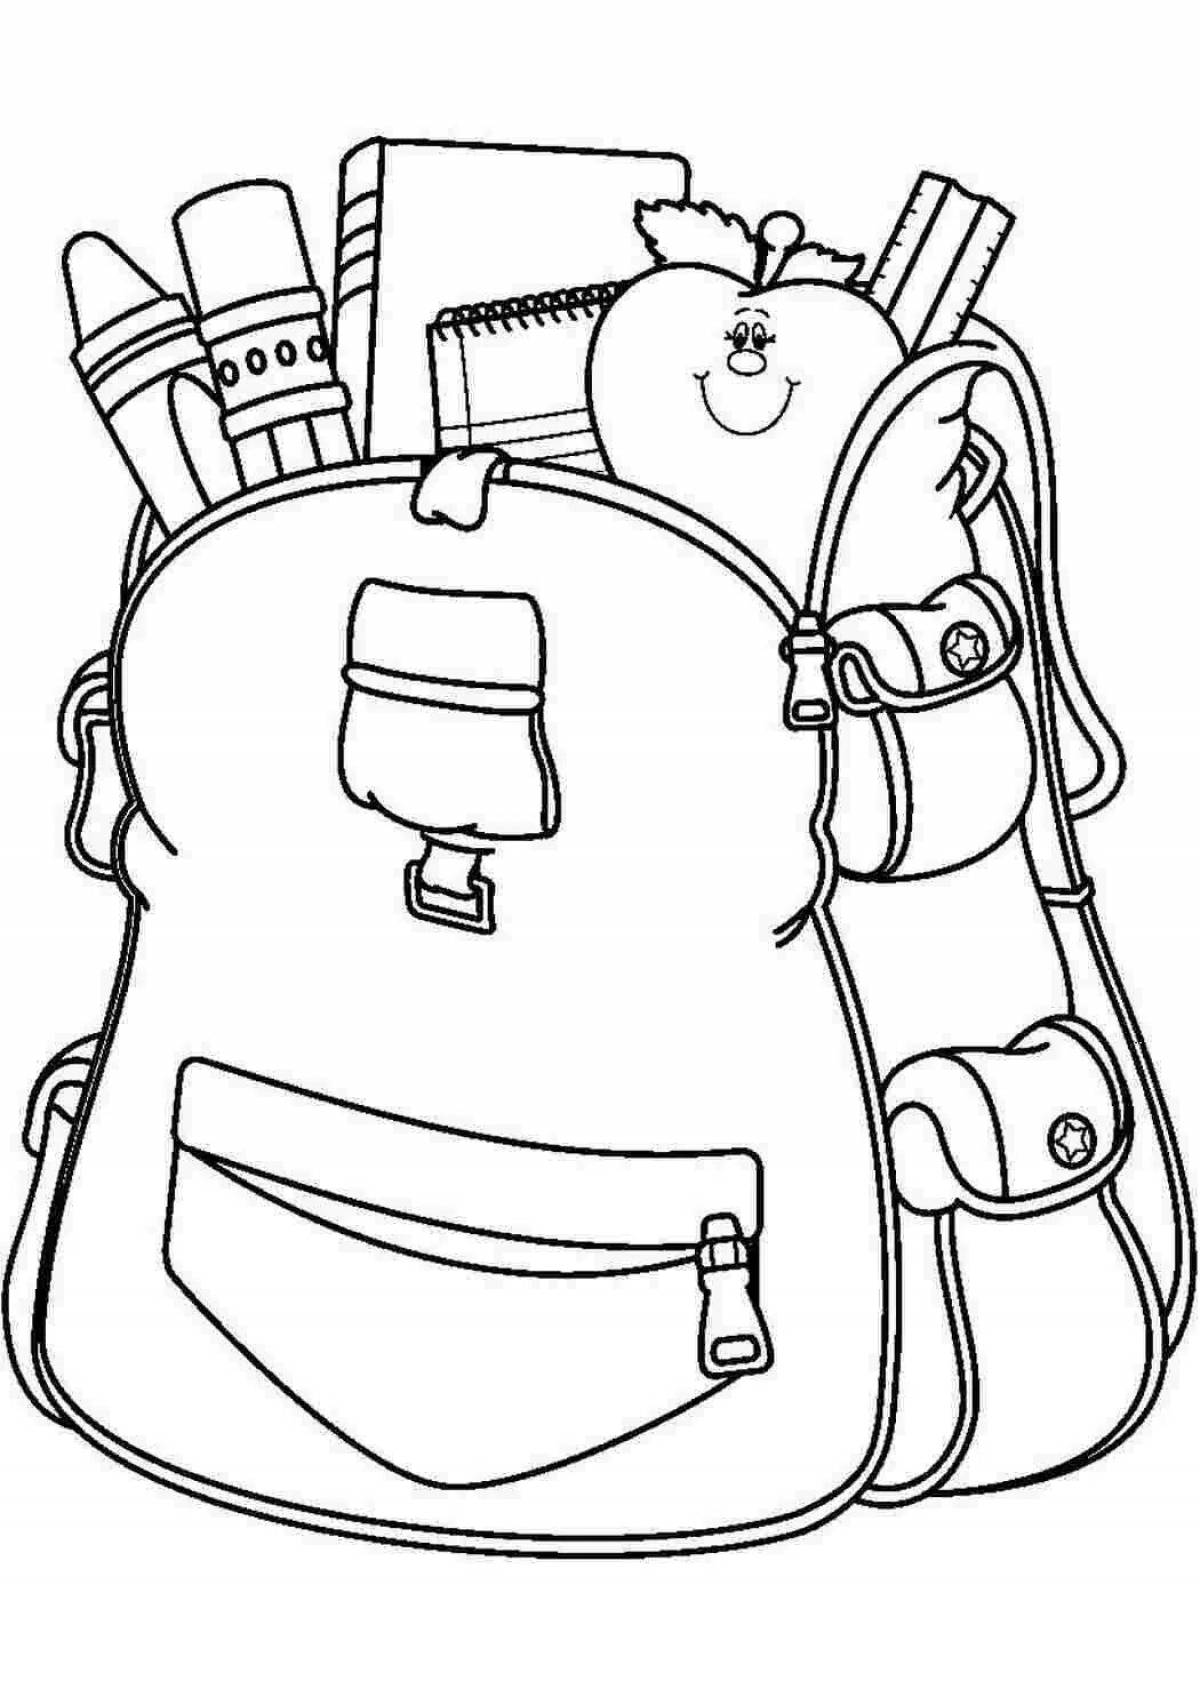 Amazing backpack coloring page